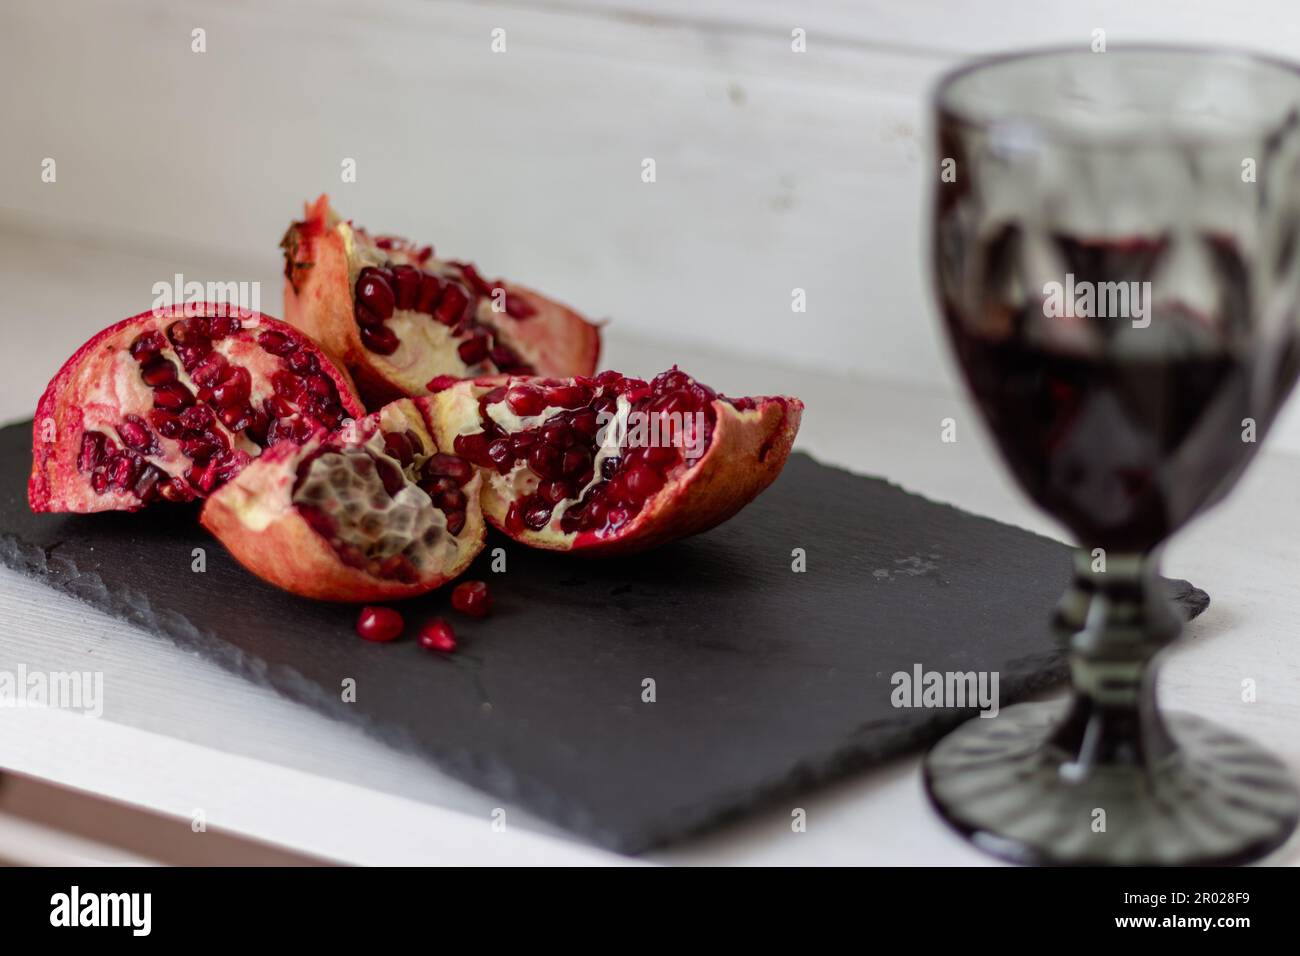 https://c8.alamy.com/comp/2R028F9/pomegranate-with-glass-of-wine-on-table-cut-pomegranate-with-seeds-and-red-wine-fruits-and-wine-summer-still-life-alcohol-drinks-and-ripe-fruits-2R028F9.jpg